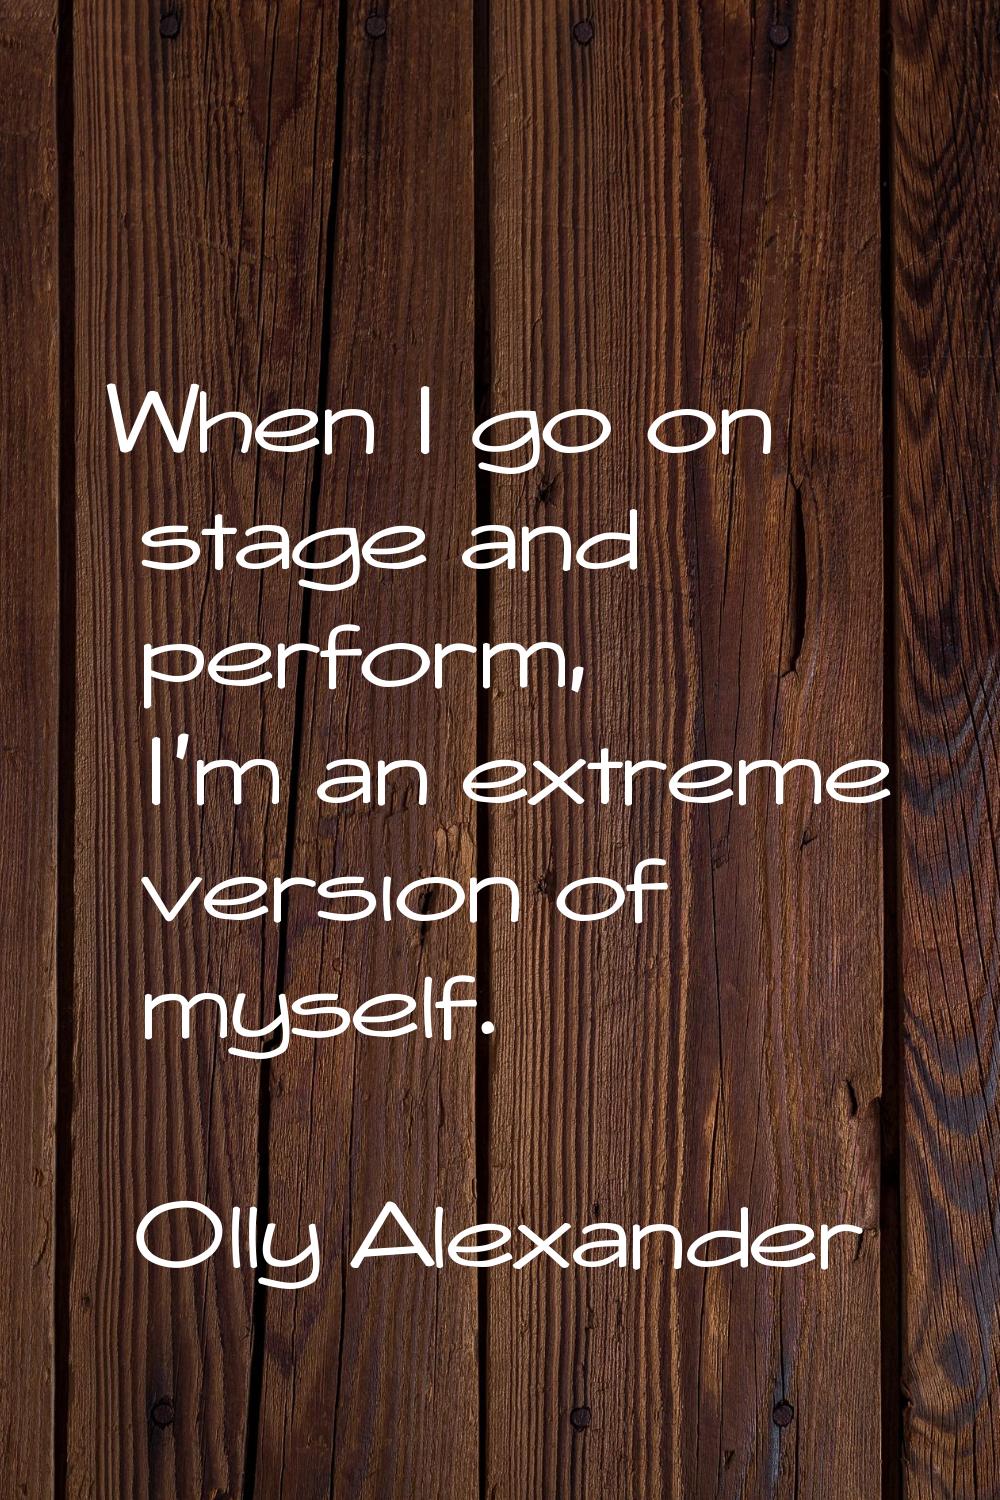 When I go on stage and perform, I'm an extreme version of myself.